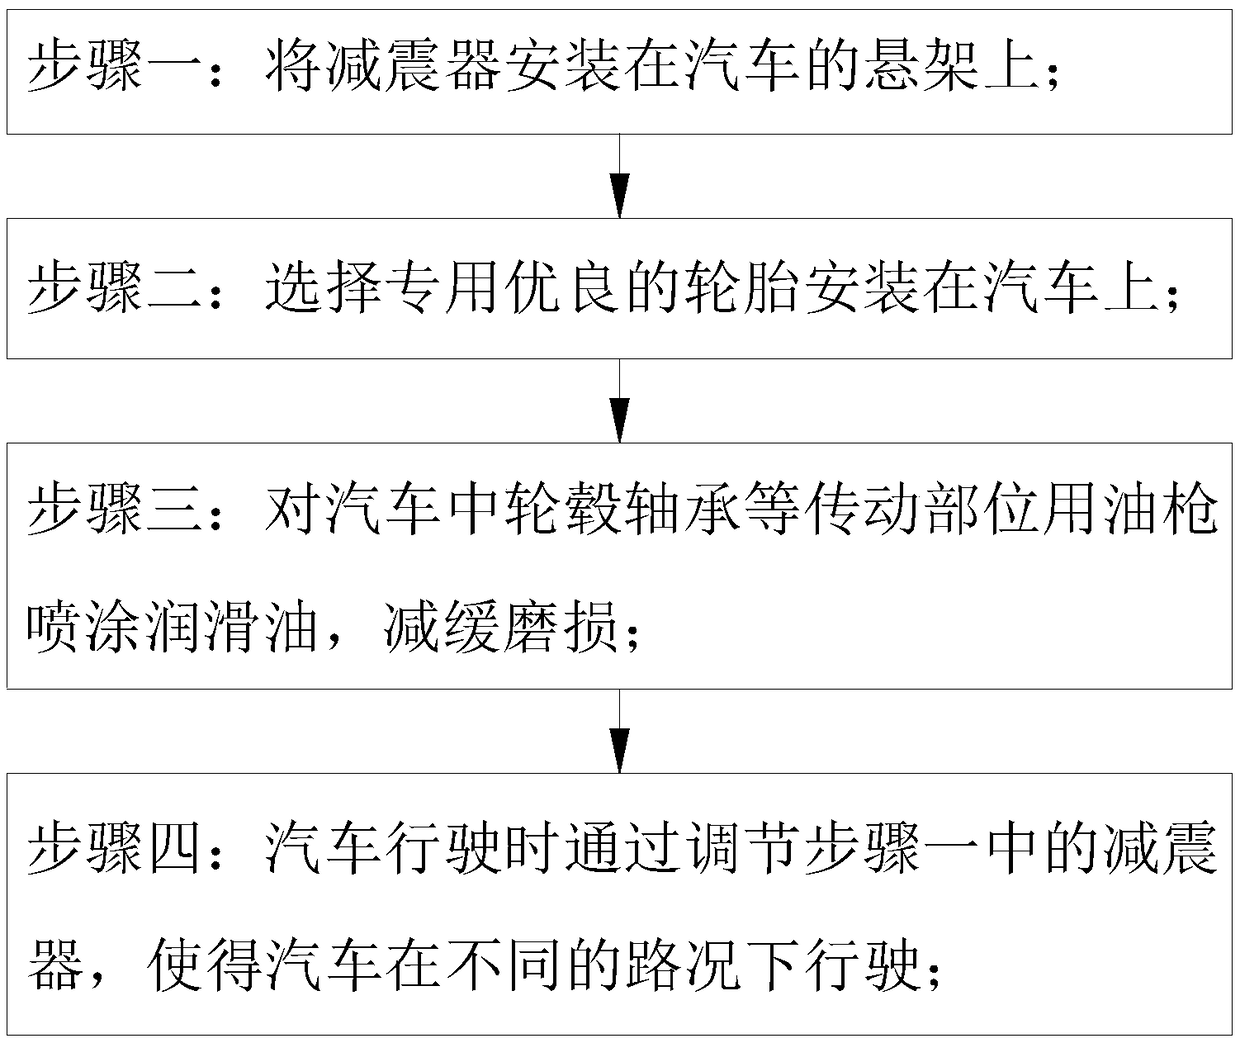 Method for improving automobile driving stability